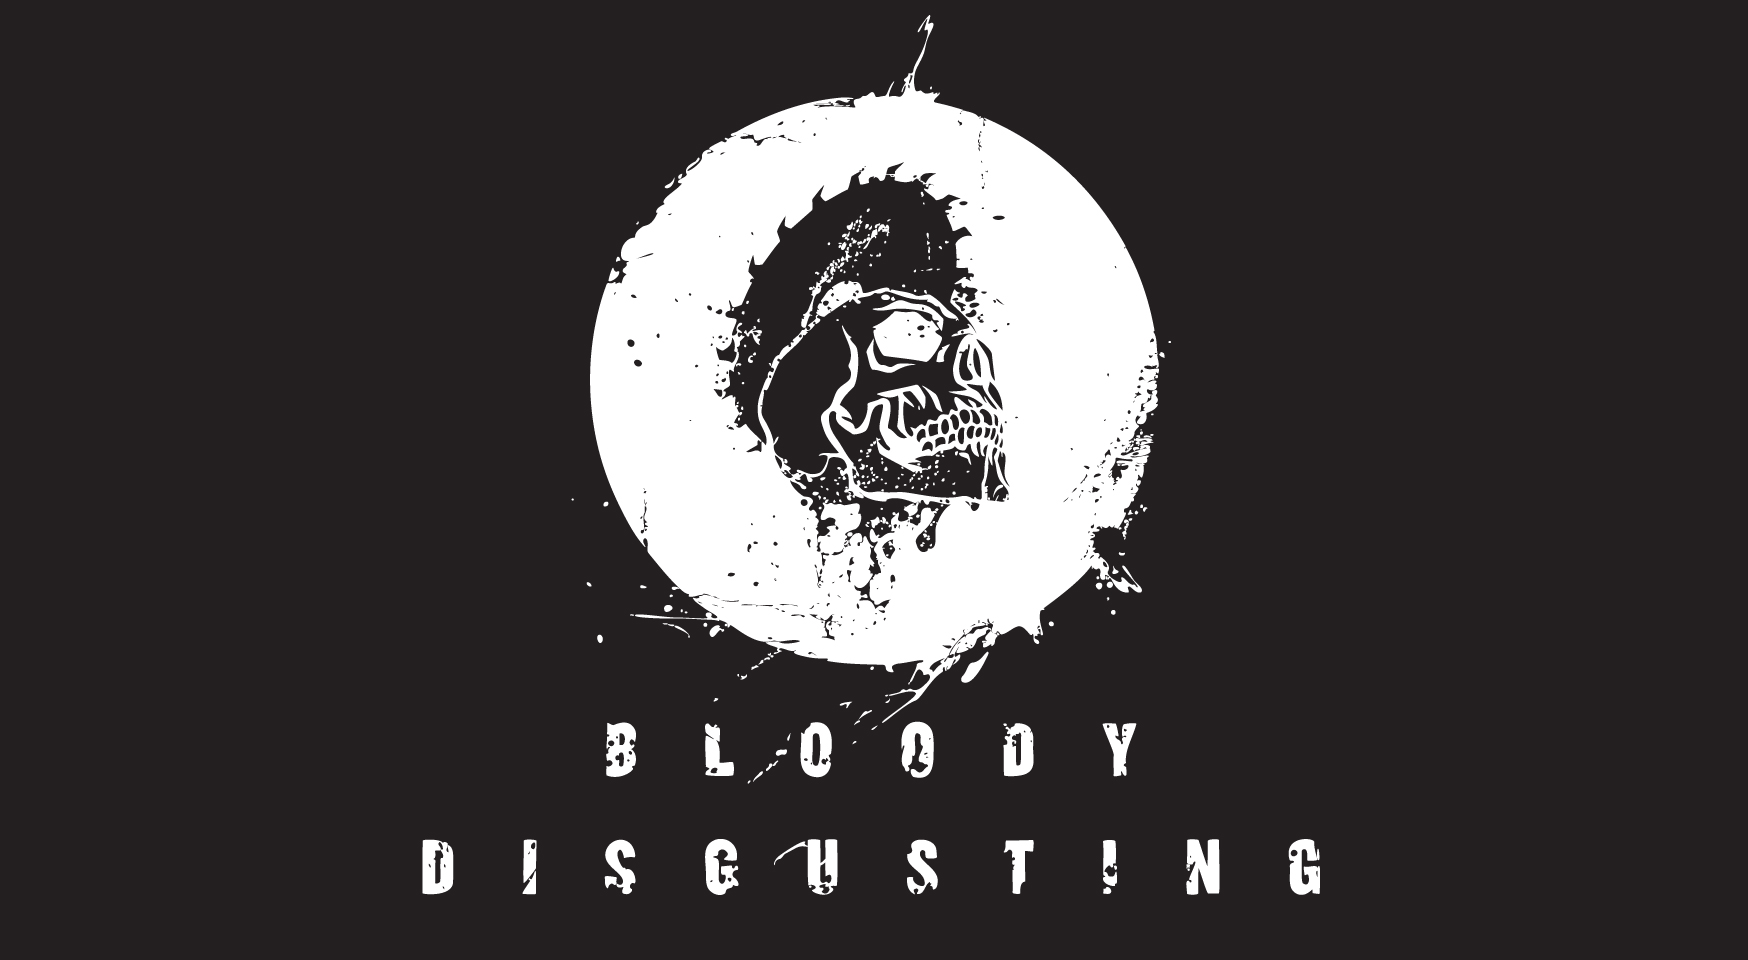 Bloody Disgusting - The best horror movies, news, videos, and podcasts